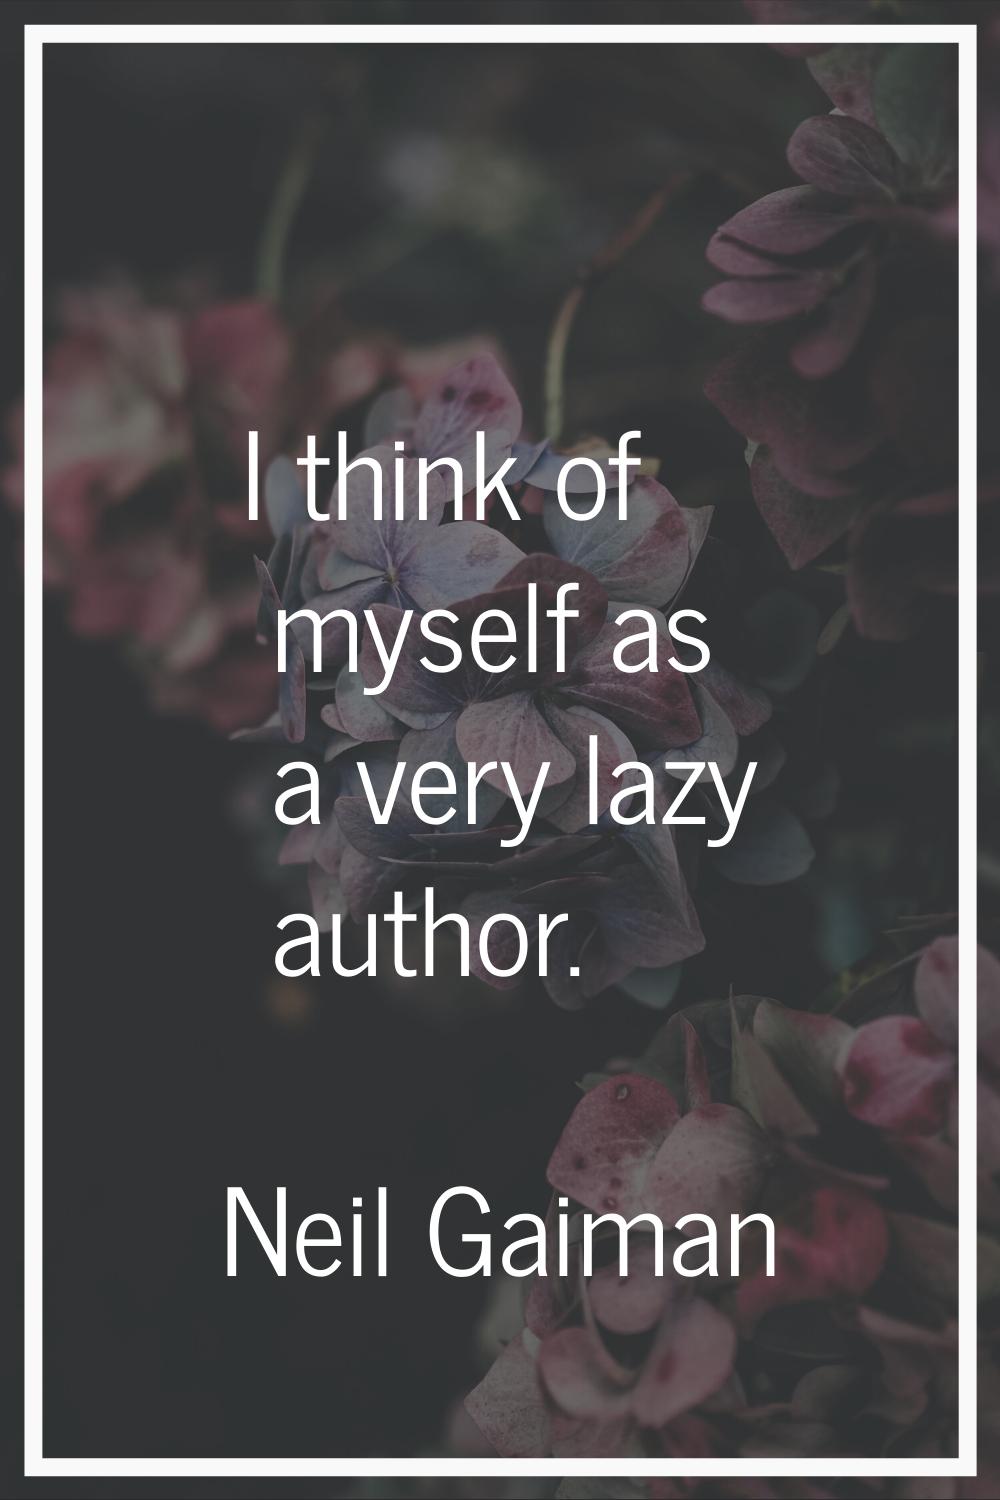 I think of myself as a very lazy author.